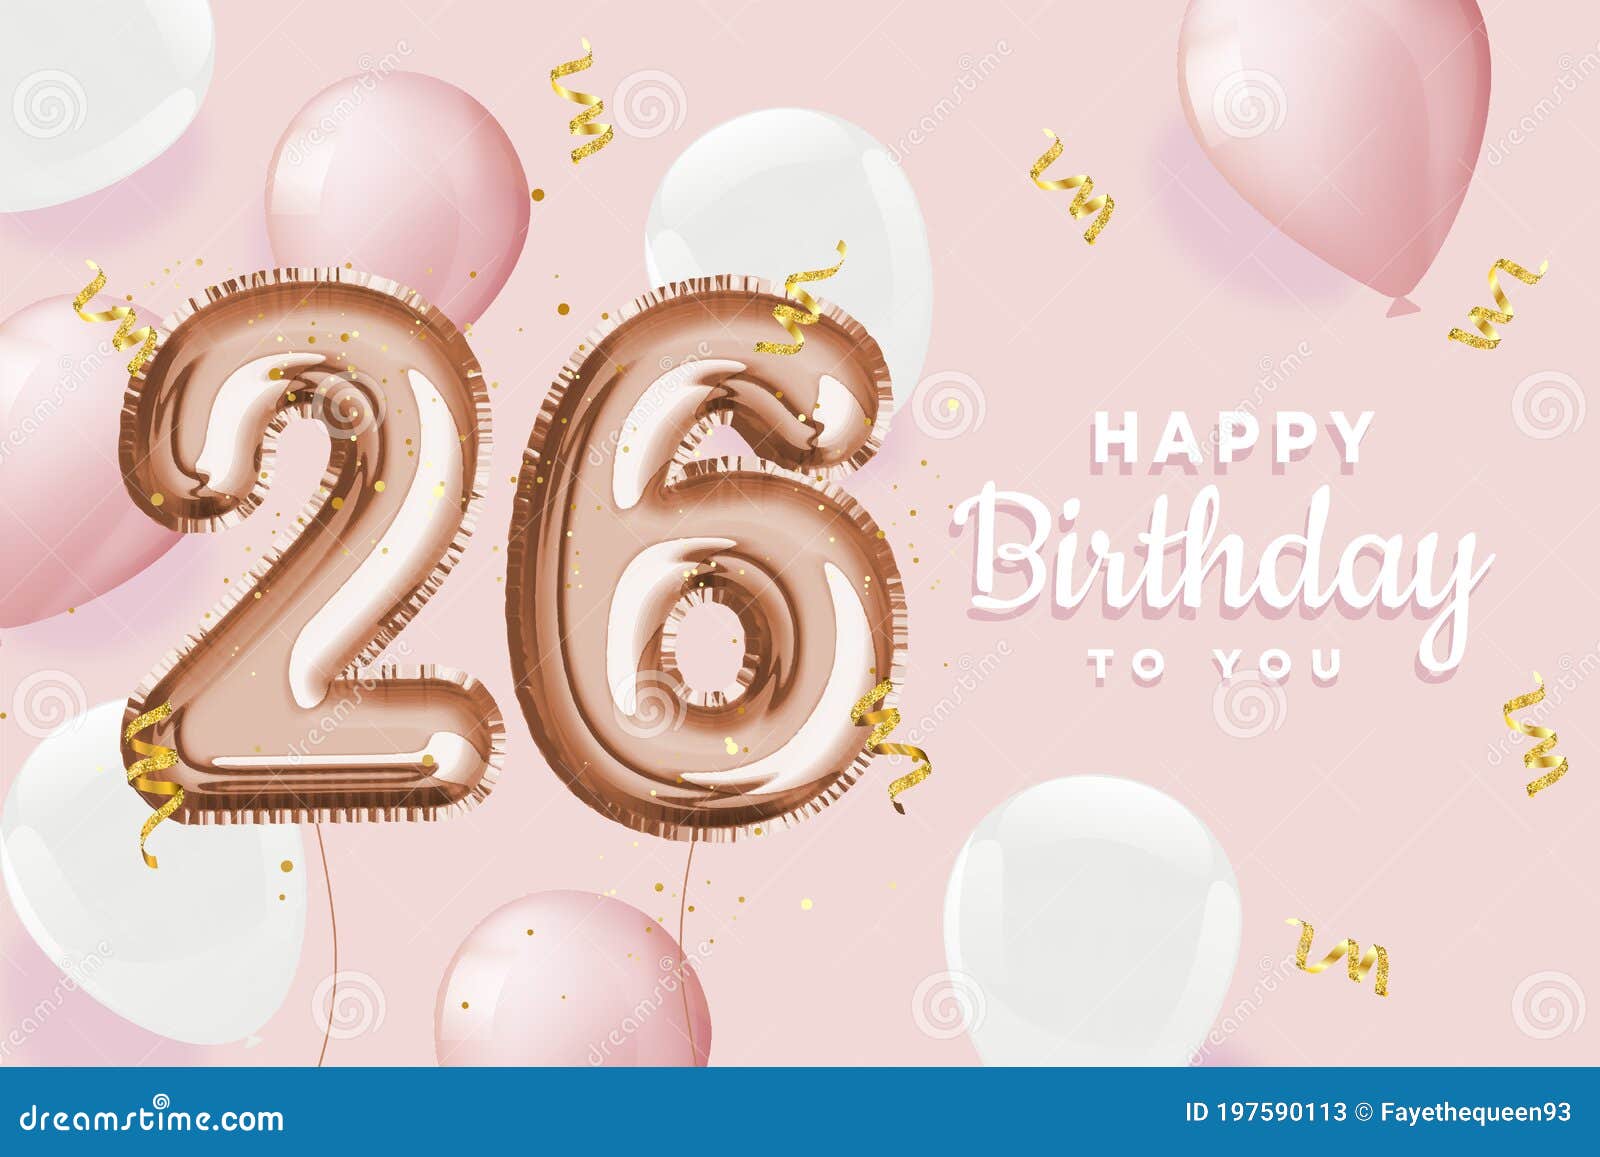 Happy 26th Birthday Pink Foil Balloon Greeting Background. Stock Vector - Illustration of love, cute: 197590113